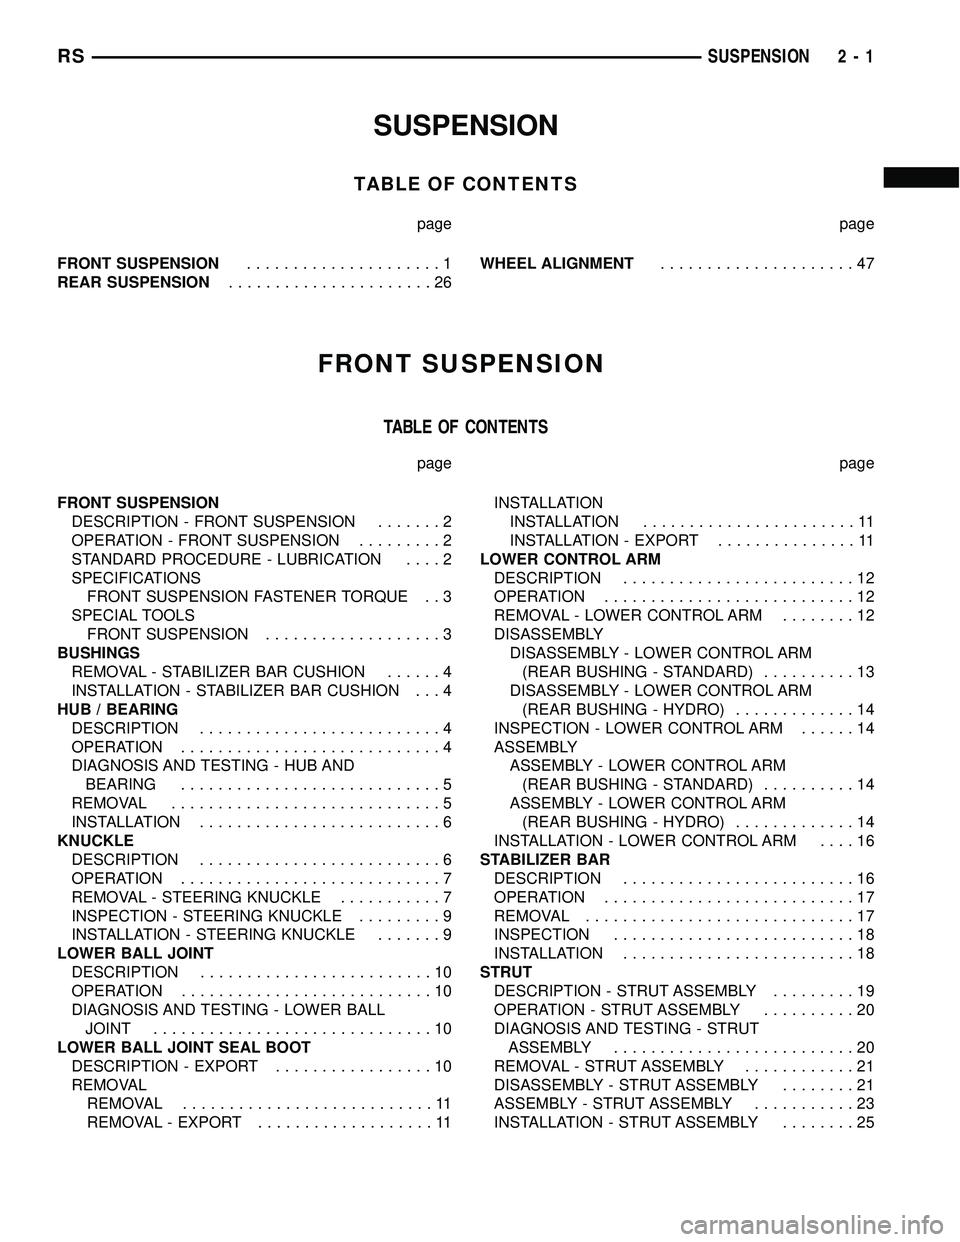 DODGE TOWN AND COUNTRY 2004  Service Manual SUSPENSION
TABLE OF CONTENTS
page page
FRONT SUSPENSION.....................1
REAR SUSPENSION......................26WHEEL ALIGNMENT.....................47
FRONT SUSPENSION
TABLE OF CONTENTS
page page